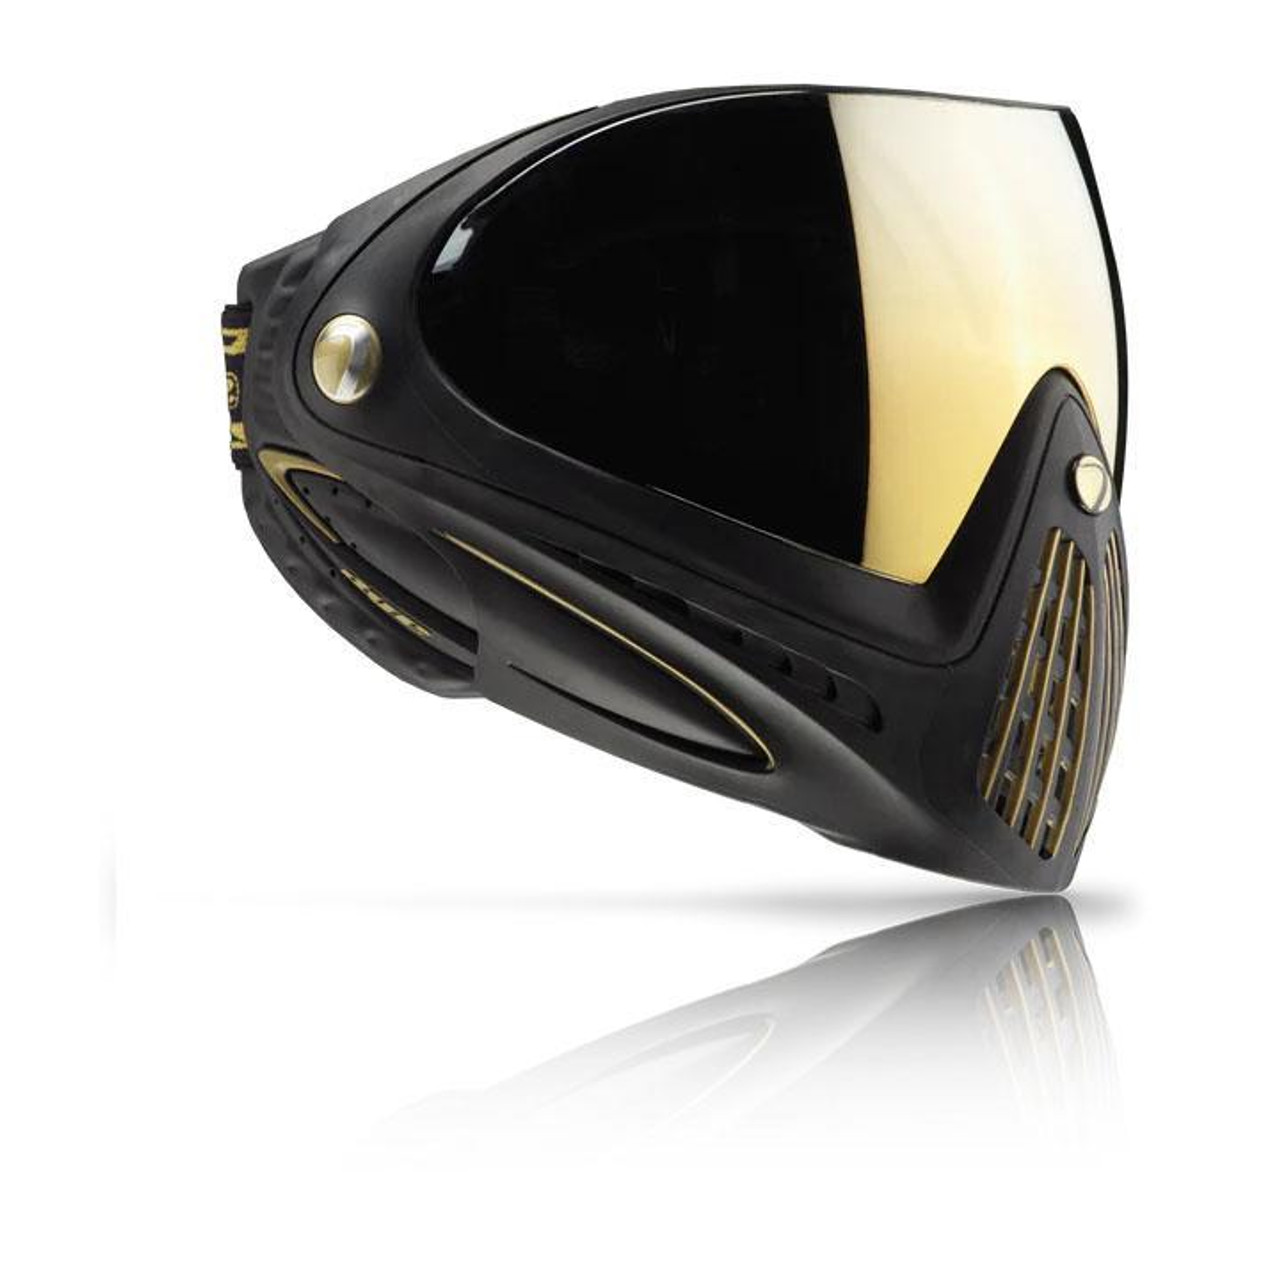 DYE I4 GOGGLE - BLACK / GOLD SPECIAL EDITION